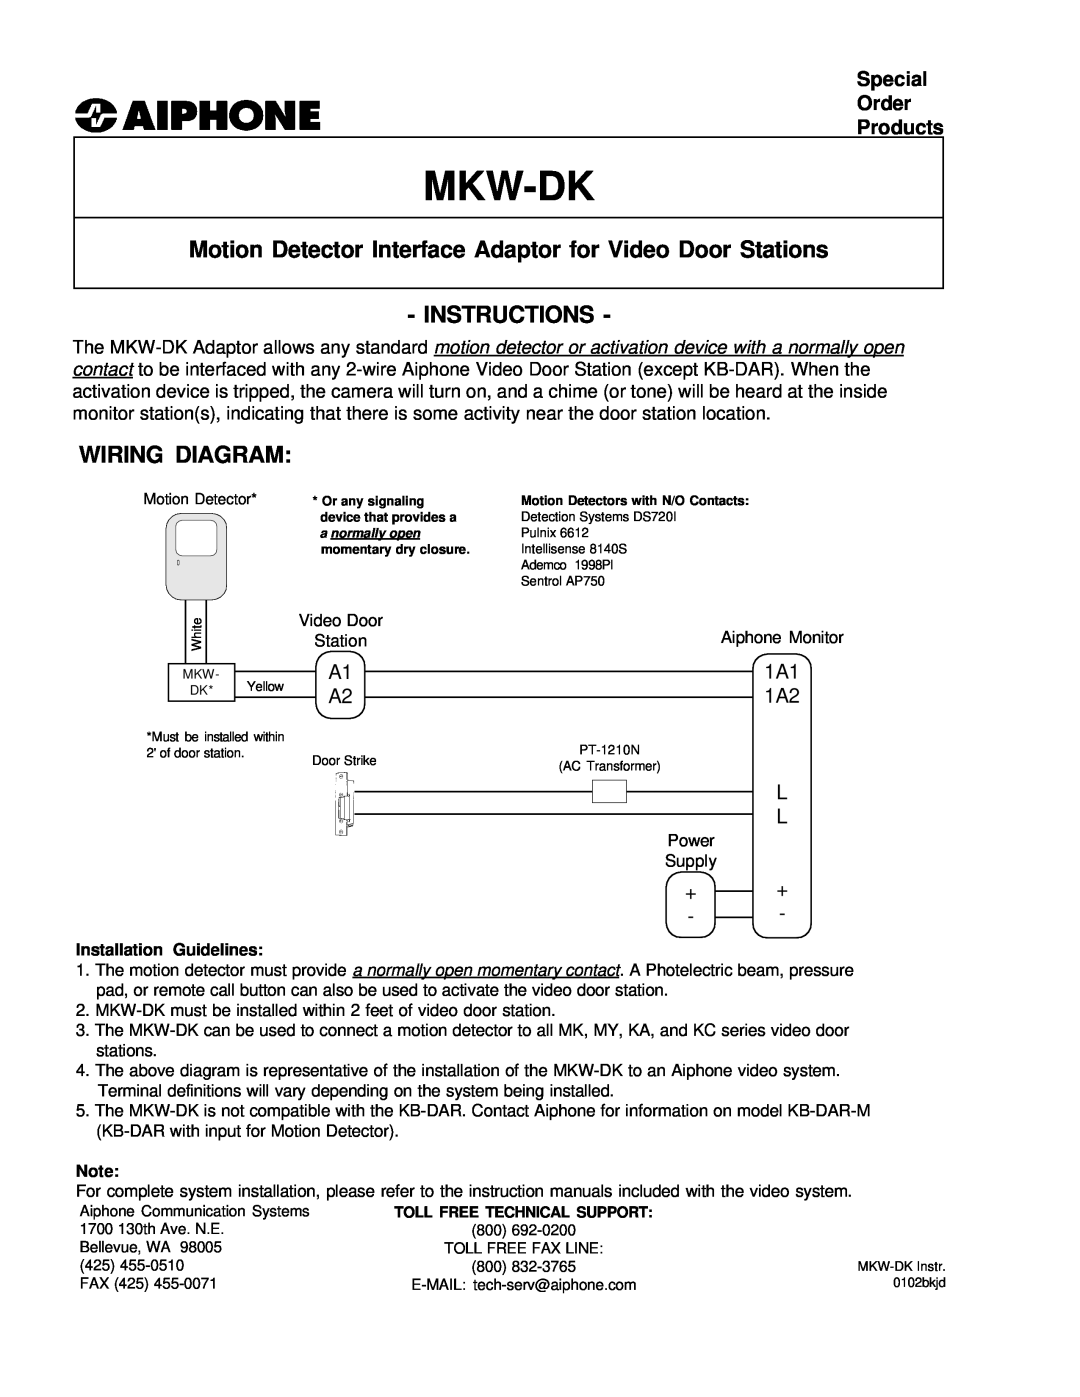 Aiphone MKW-DK instruction manual Mkw-Dk, Instructions, Wiring Diagram, Special Order Products, Installation Guidelines 